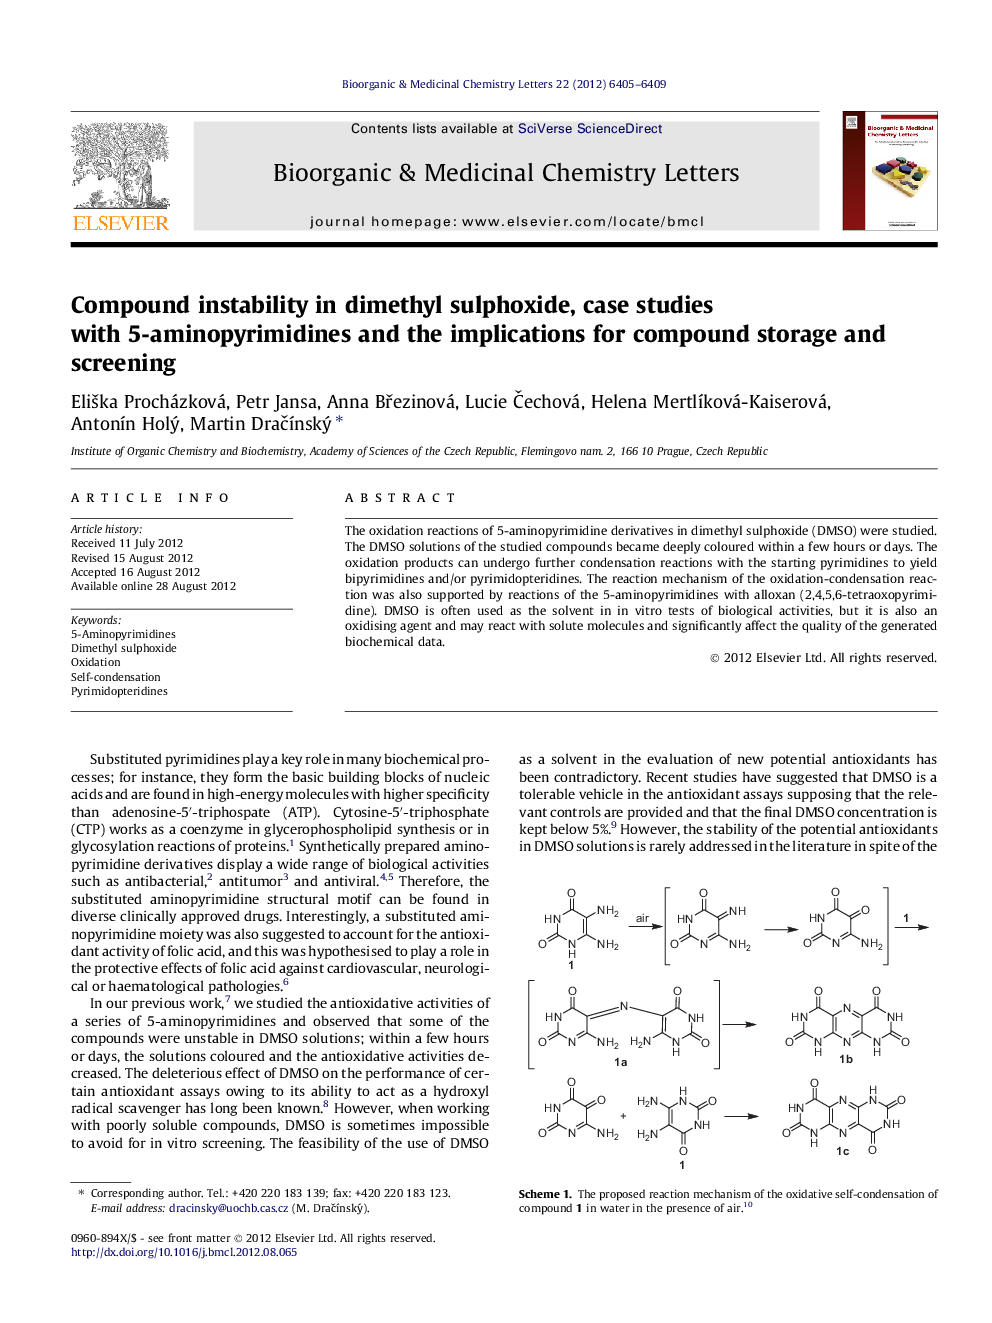 Compound instability in dimethyl sulphoxide, case studies with 5-aminopyrimidines and the implications for compound storage and screening